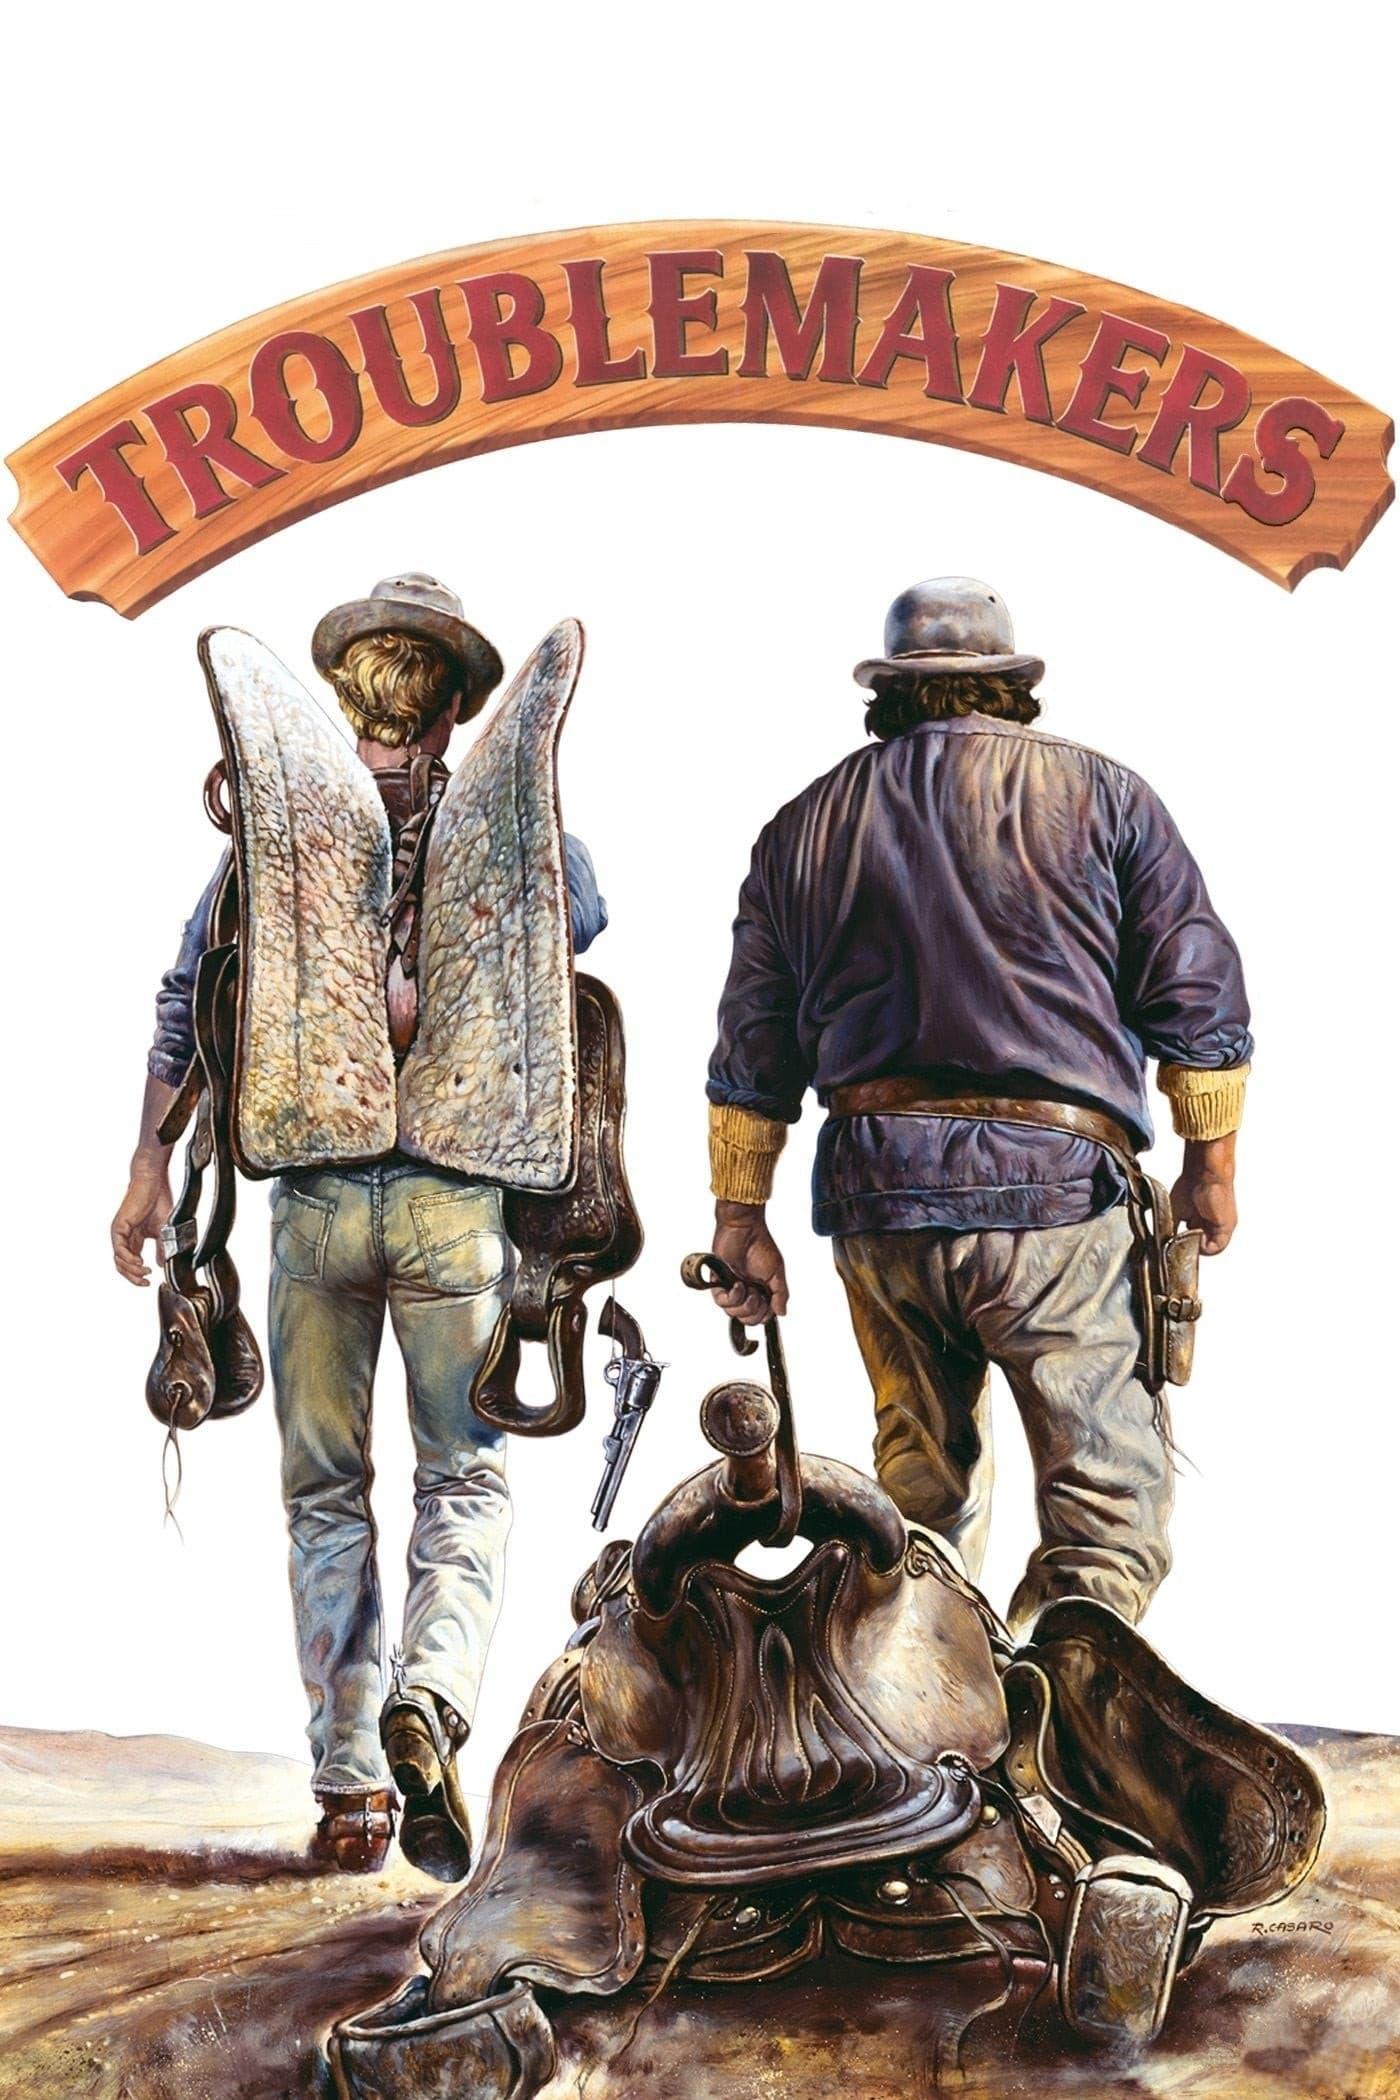 Troublemakers poster